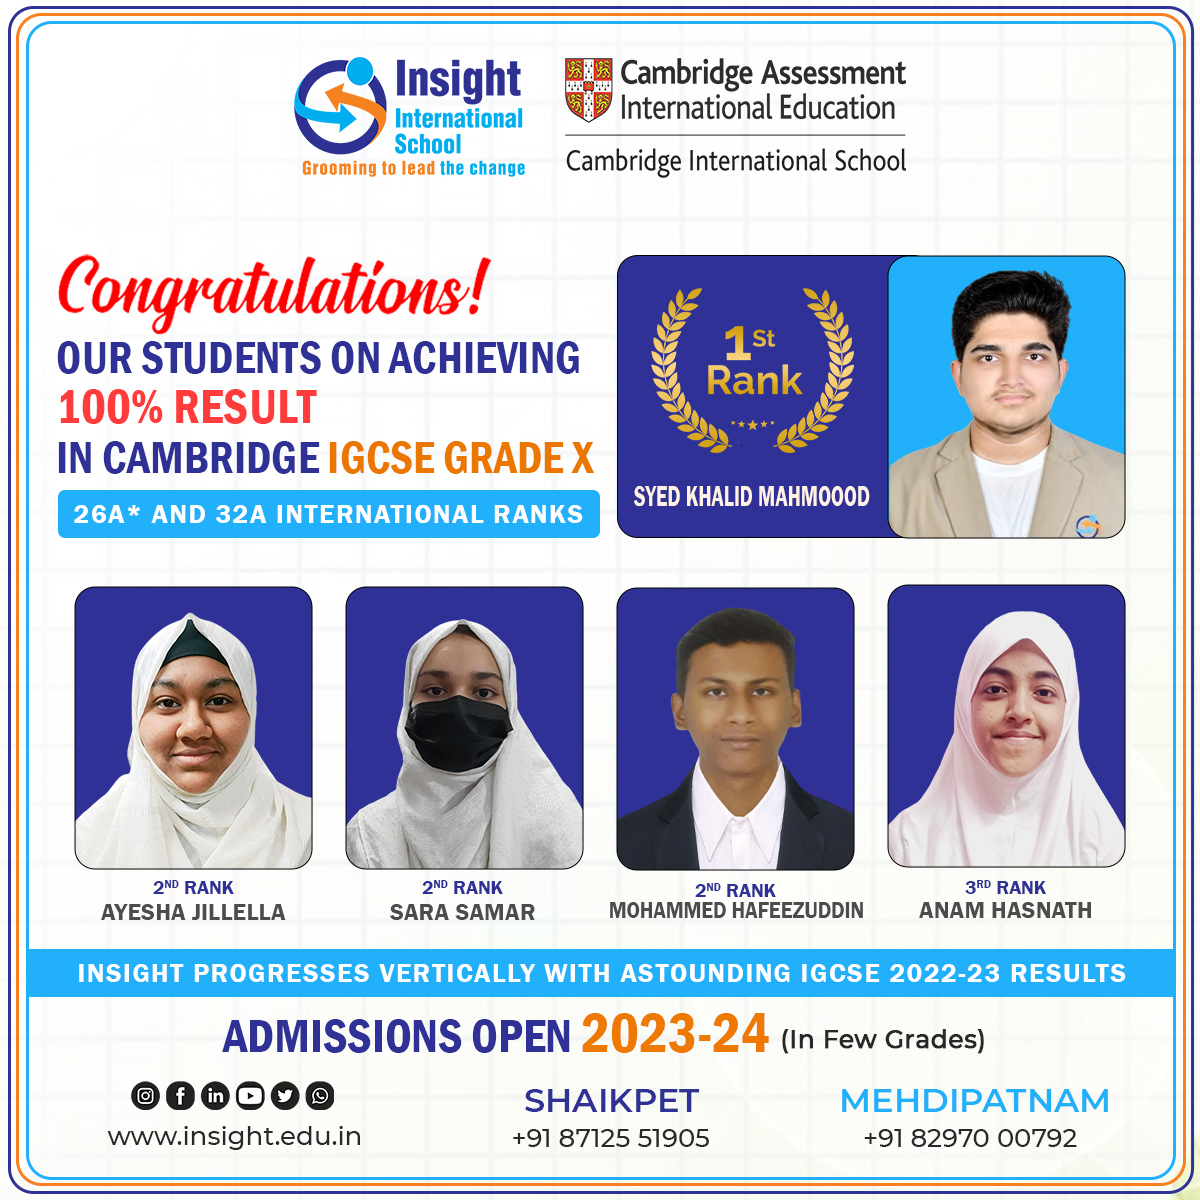 Proudly Shining: #Celebrating our students' remarkable success in #Cambridge #IGCSE Grade X with 100% #results, 26A* and 32A International Ranks!
#InsightInternationalSchool #cambridgeresults #igcseresults #internationalrank  #internationalschool #cambridgeschool #hyderabad